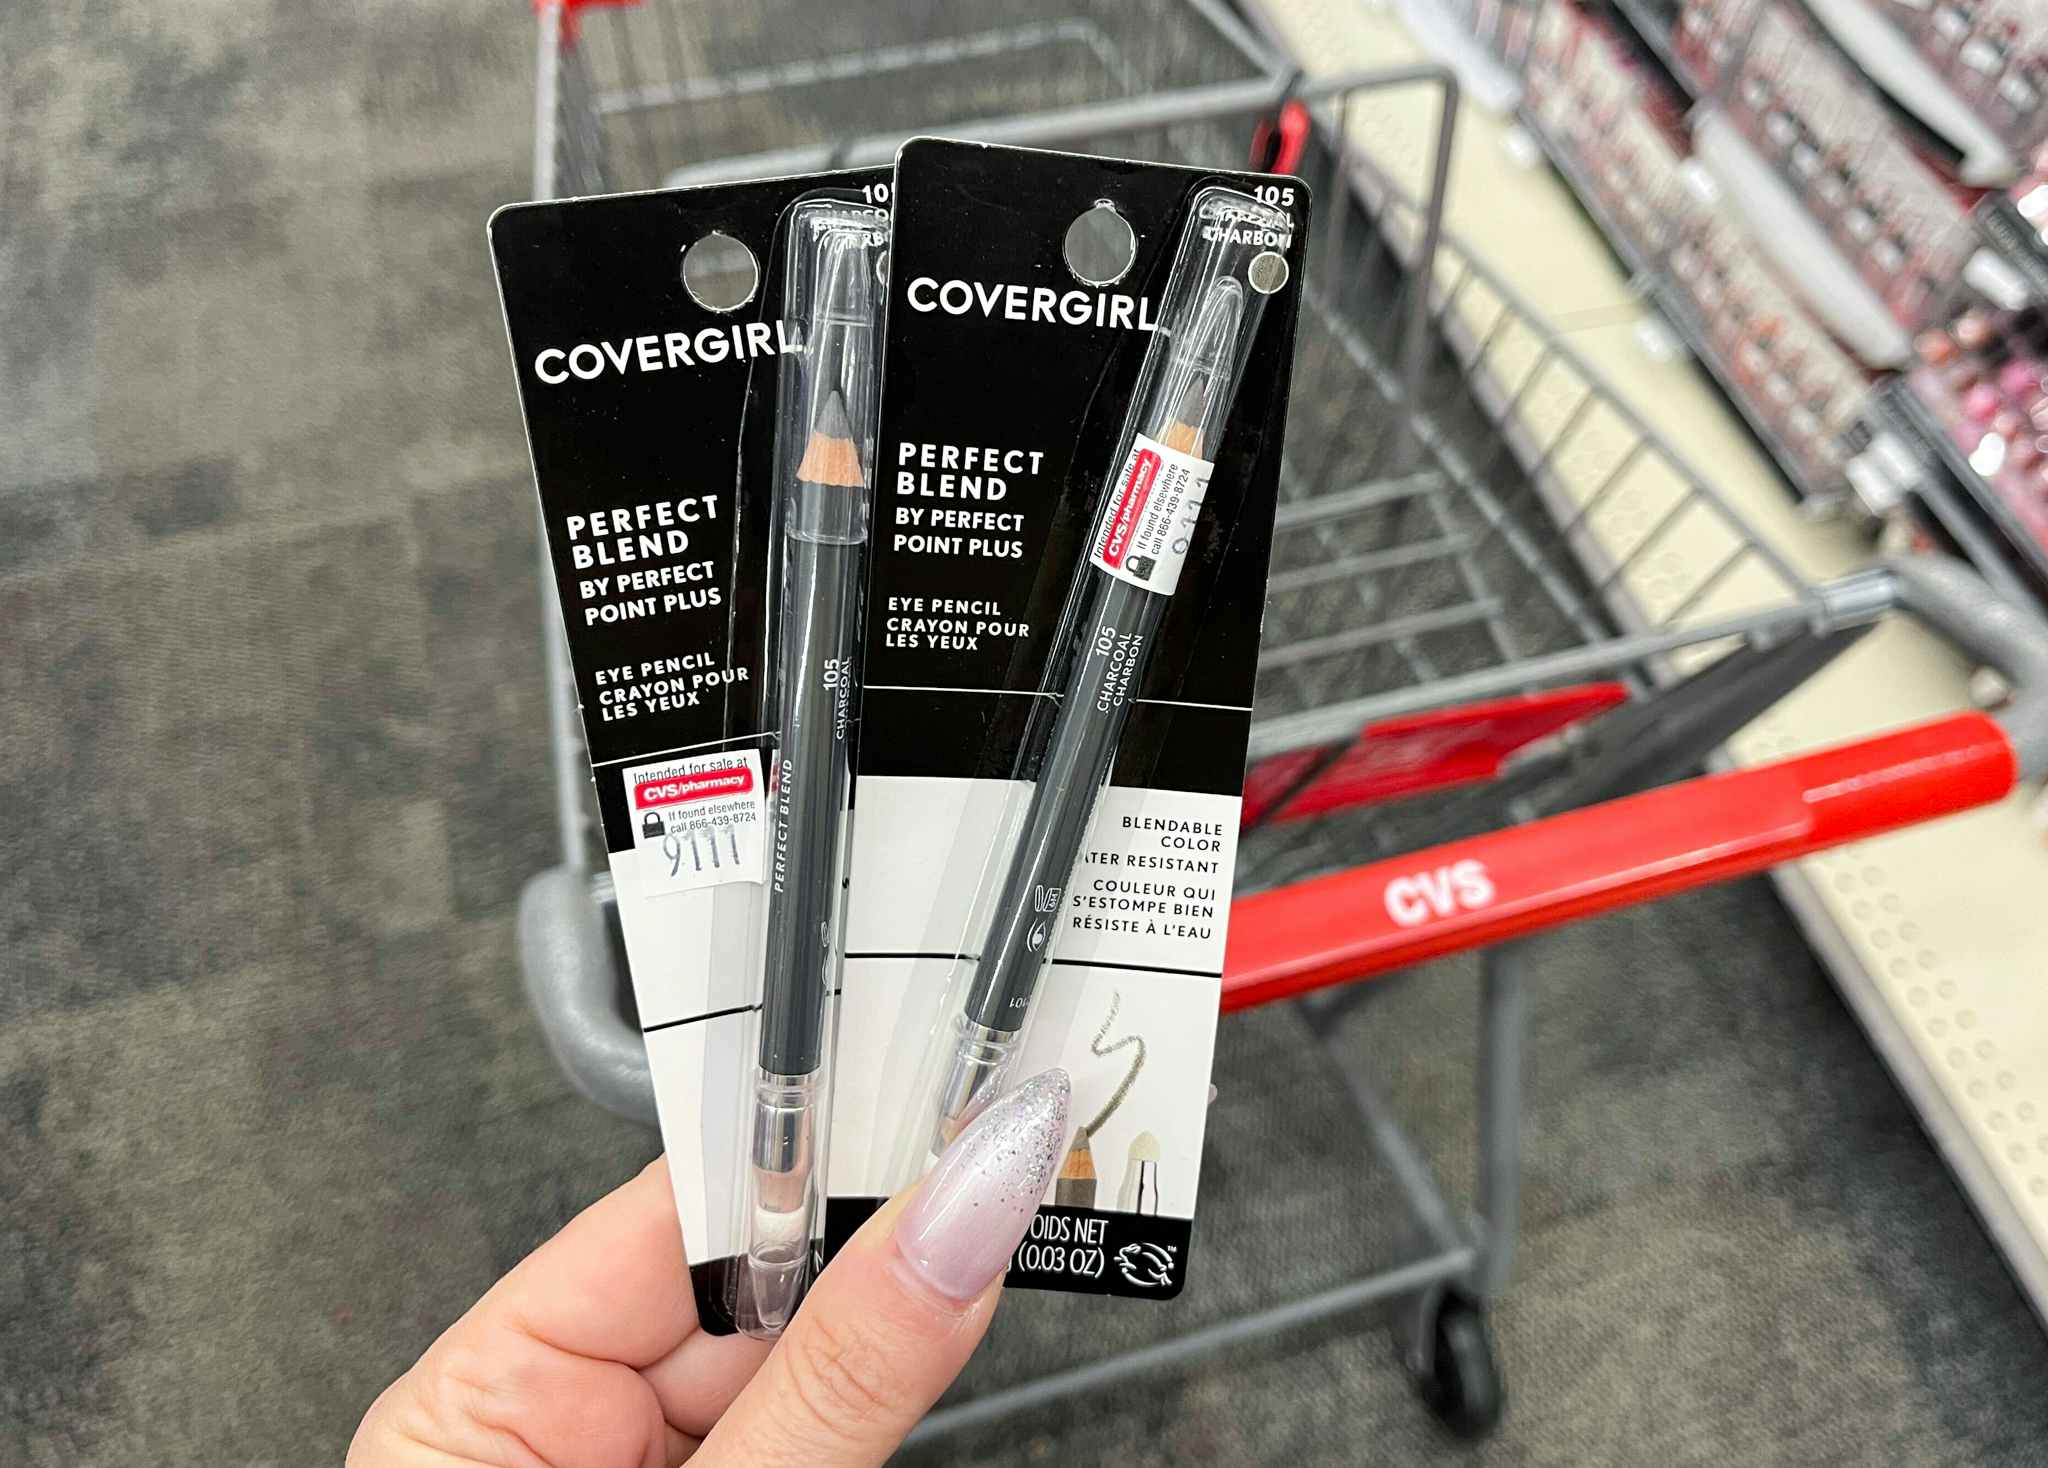 hand holding two packs of Covergirl Perfect Blend Eye Pencils